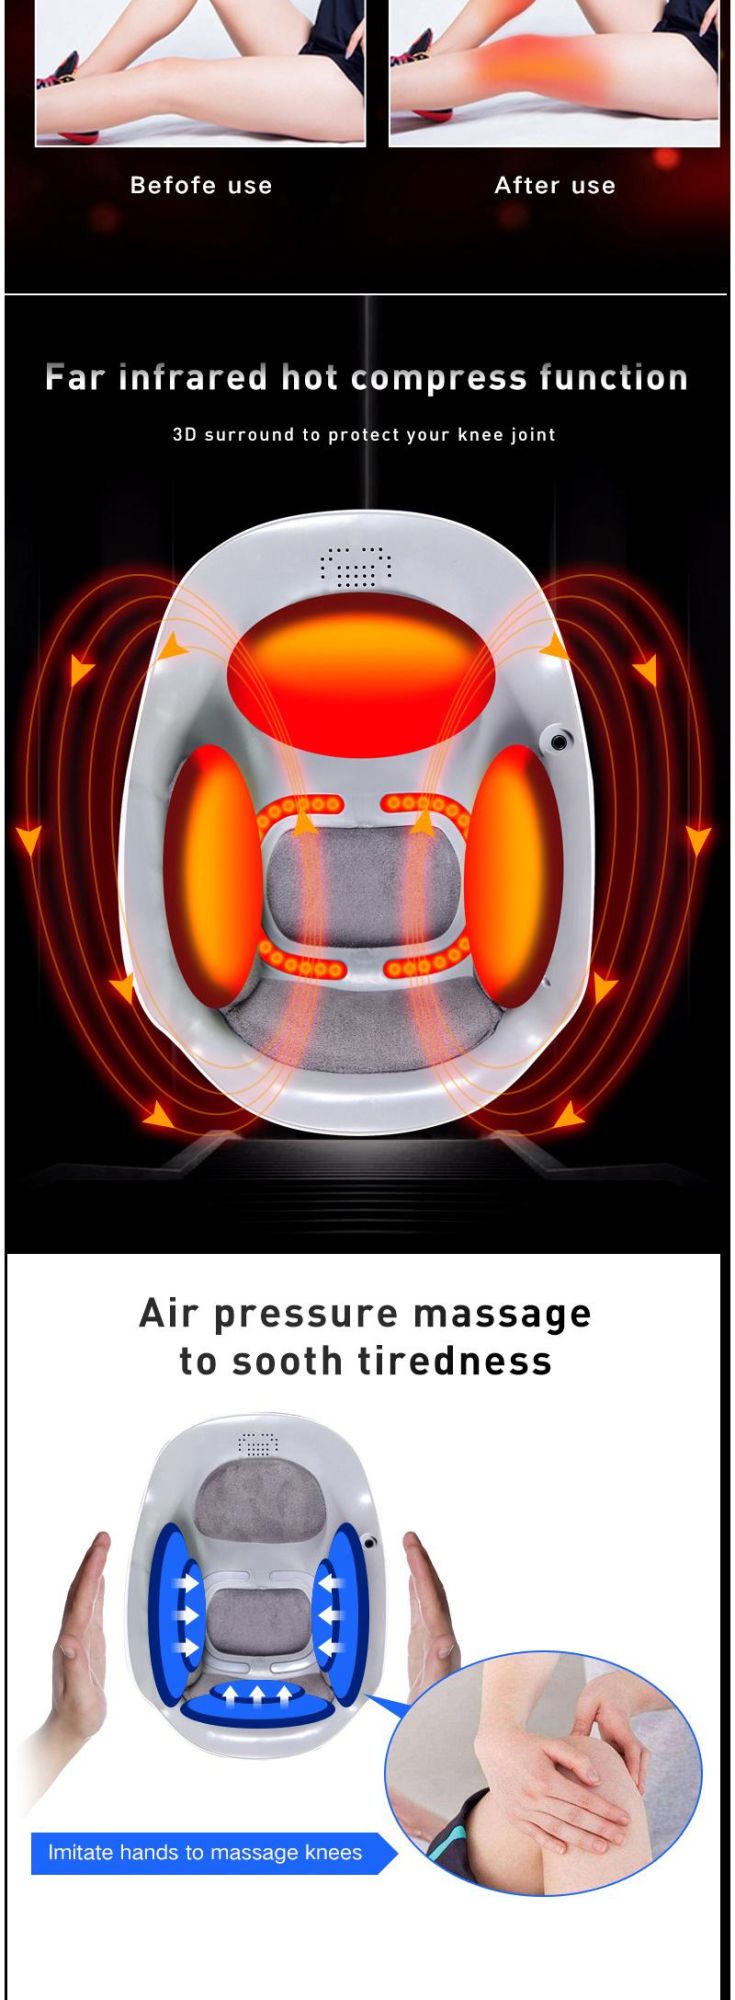 New Portable Electric Pulse Knee Massager Support Vibrator Product for Arthritis Joint Pain Relief